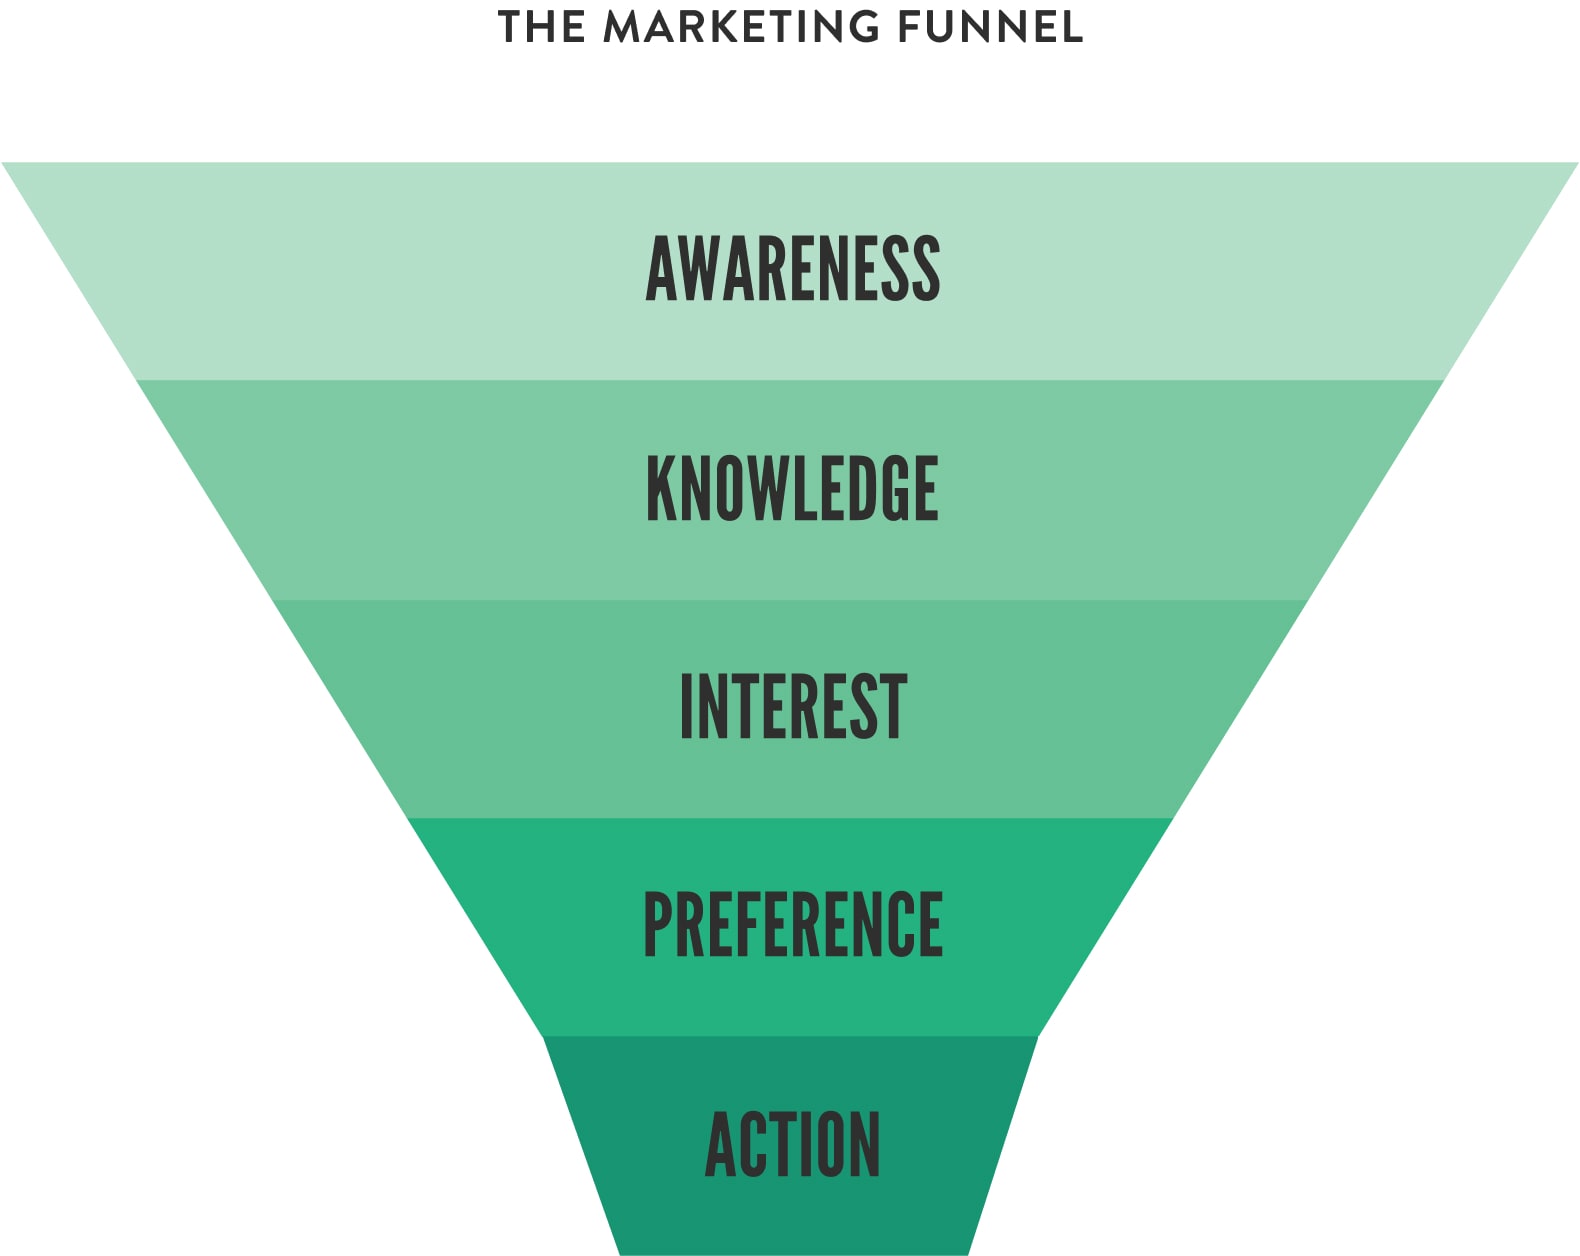 The Marketing Funnel – Awareness, Knowledge, Interest, Preference, Action